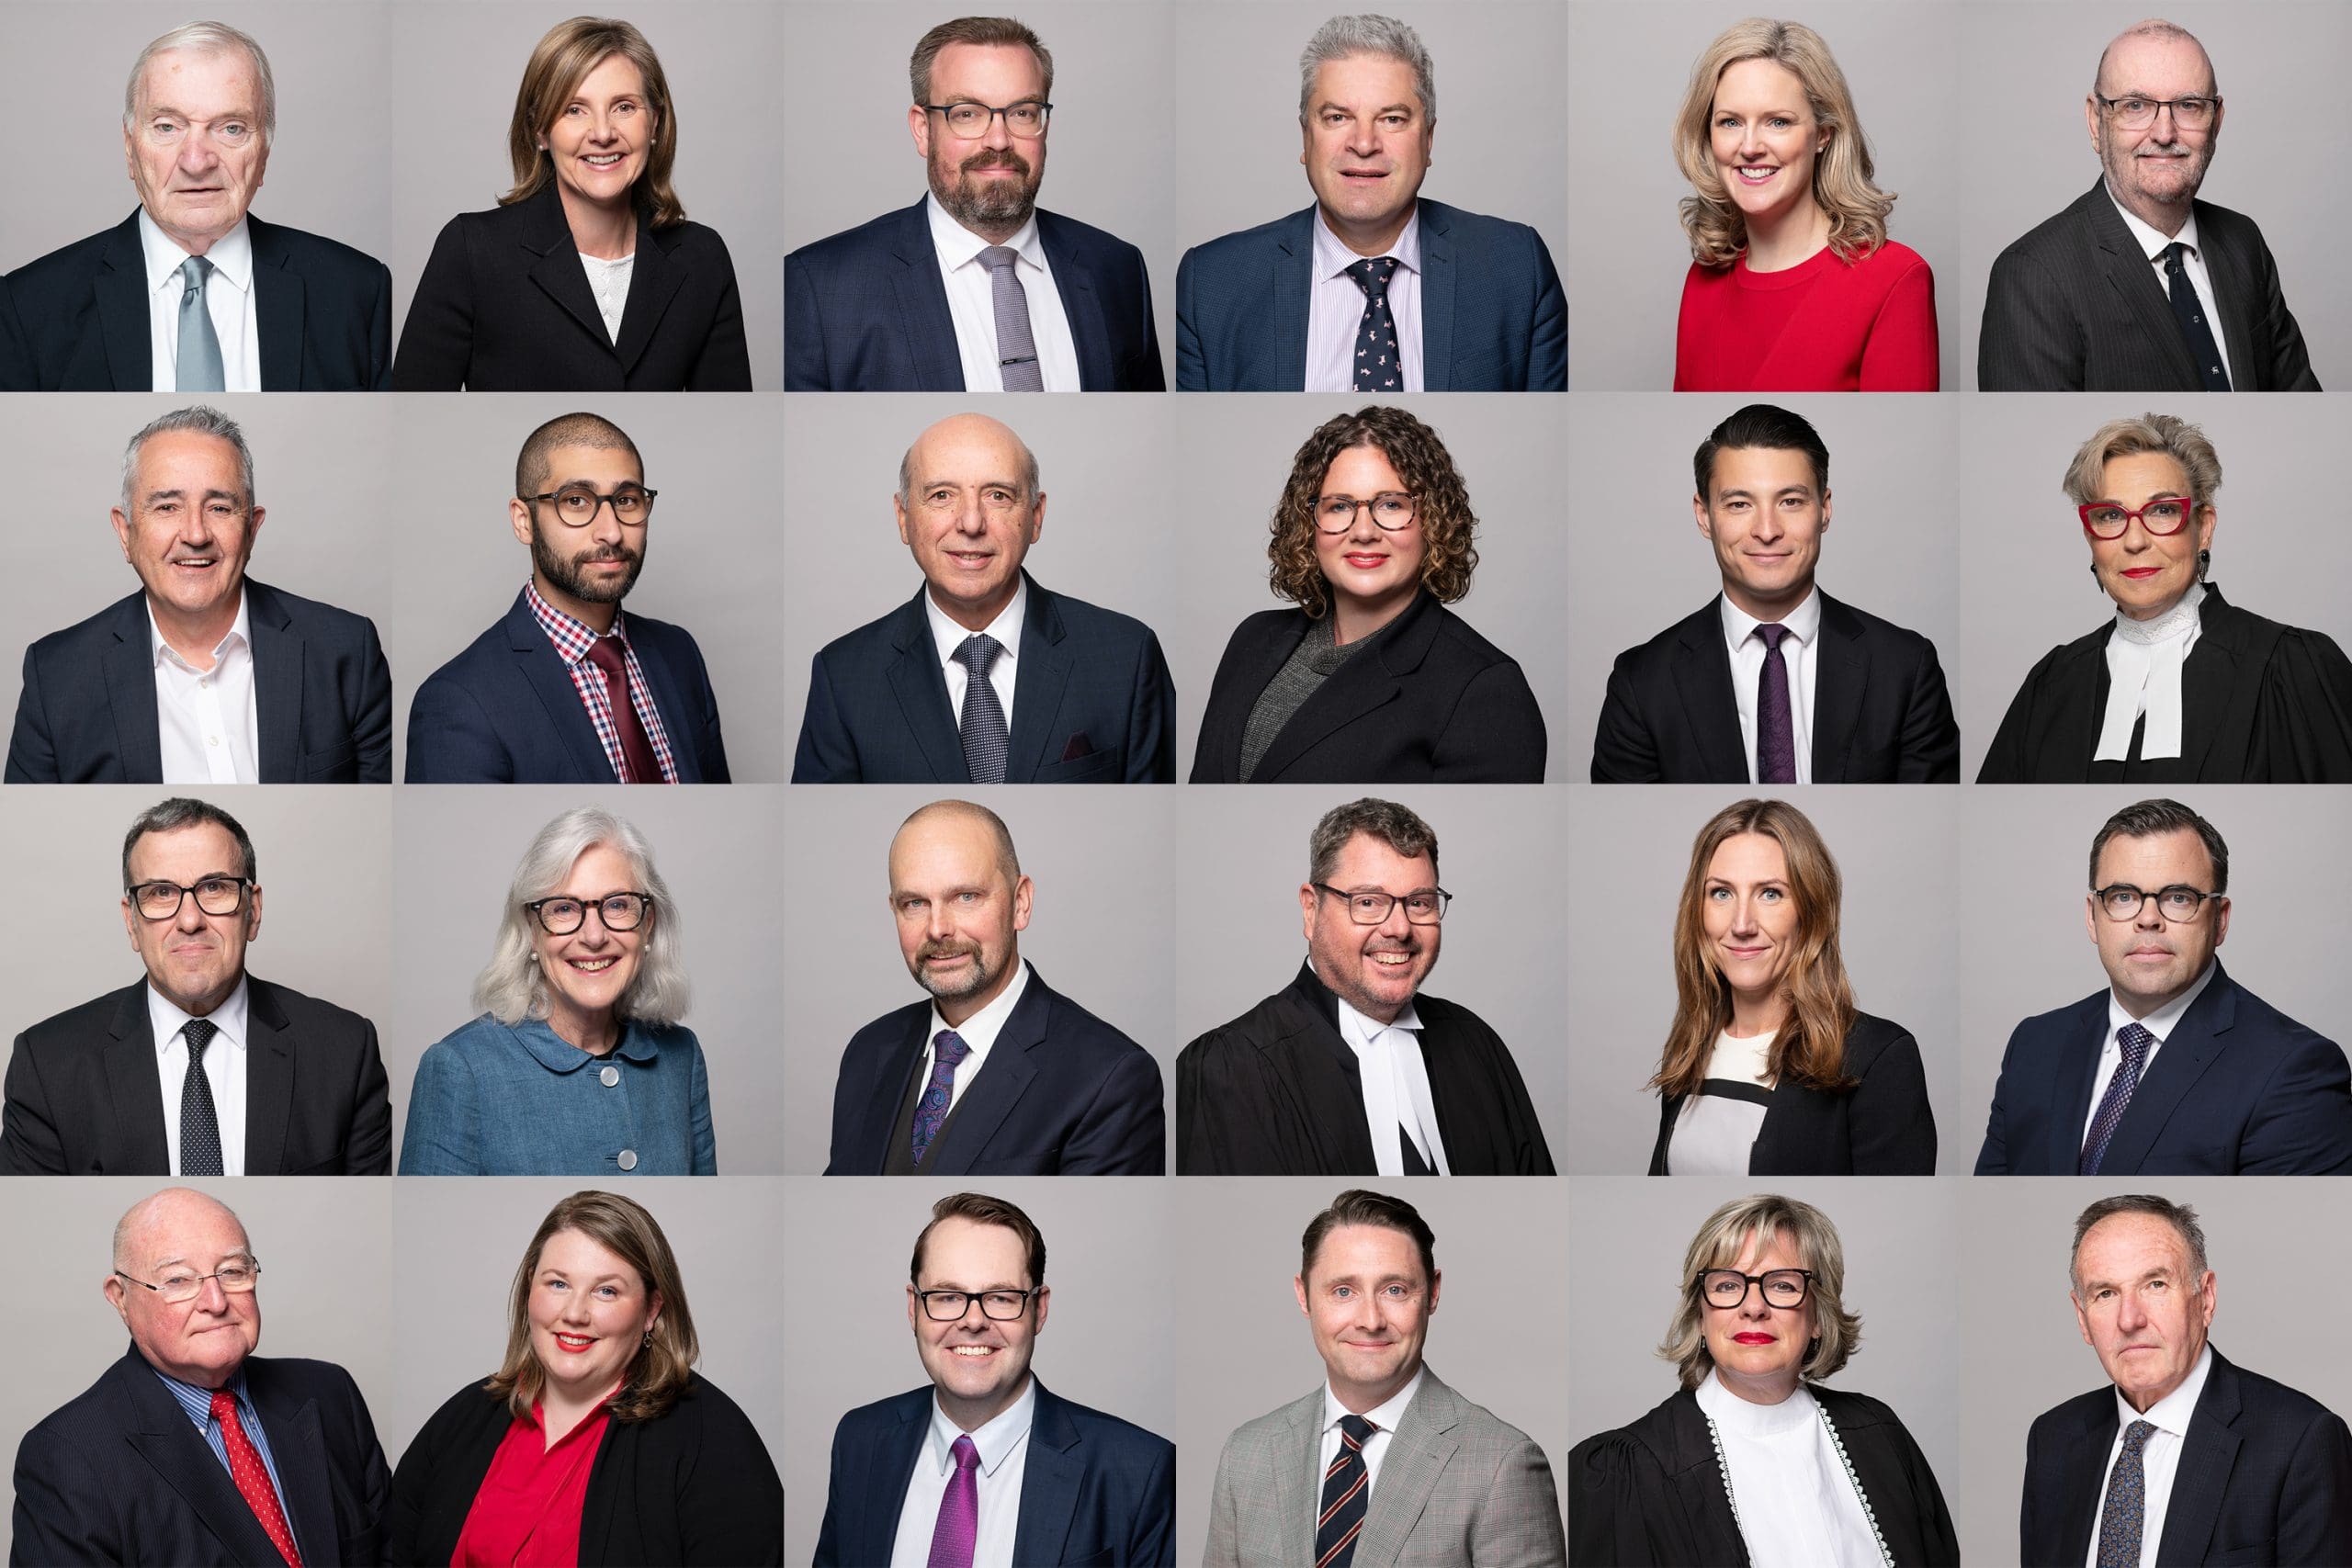 A collection of melbourne staff headshots showcasing a team of consistent images that can be used in a corporate setting. There are 24 portraits collaged together in a grid.